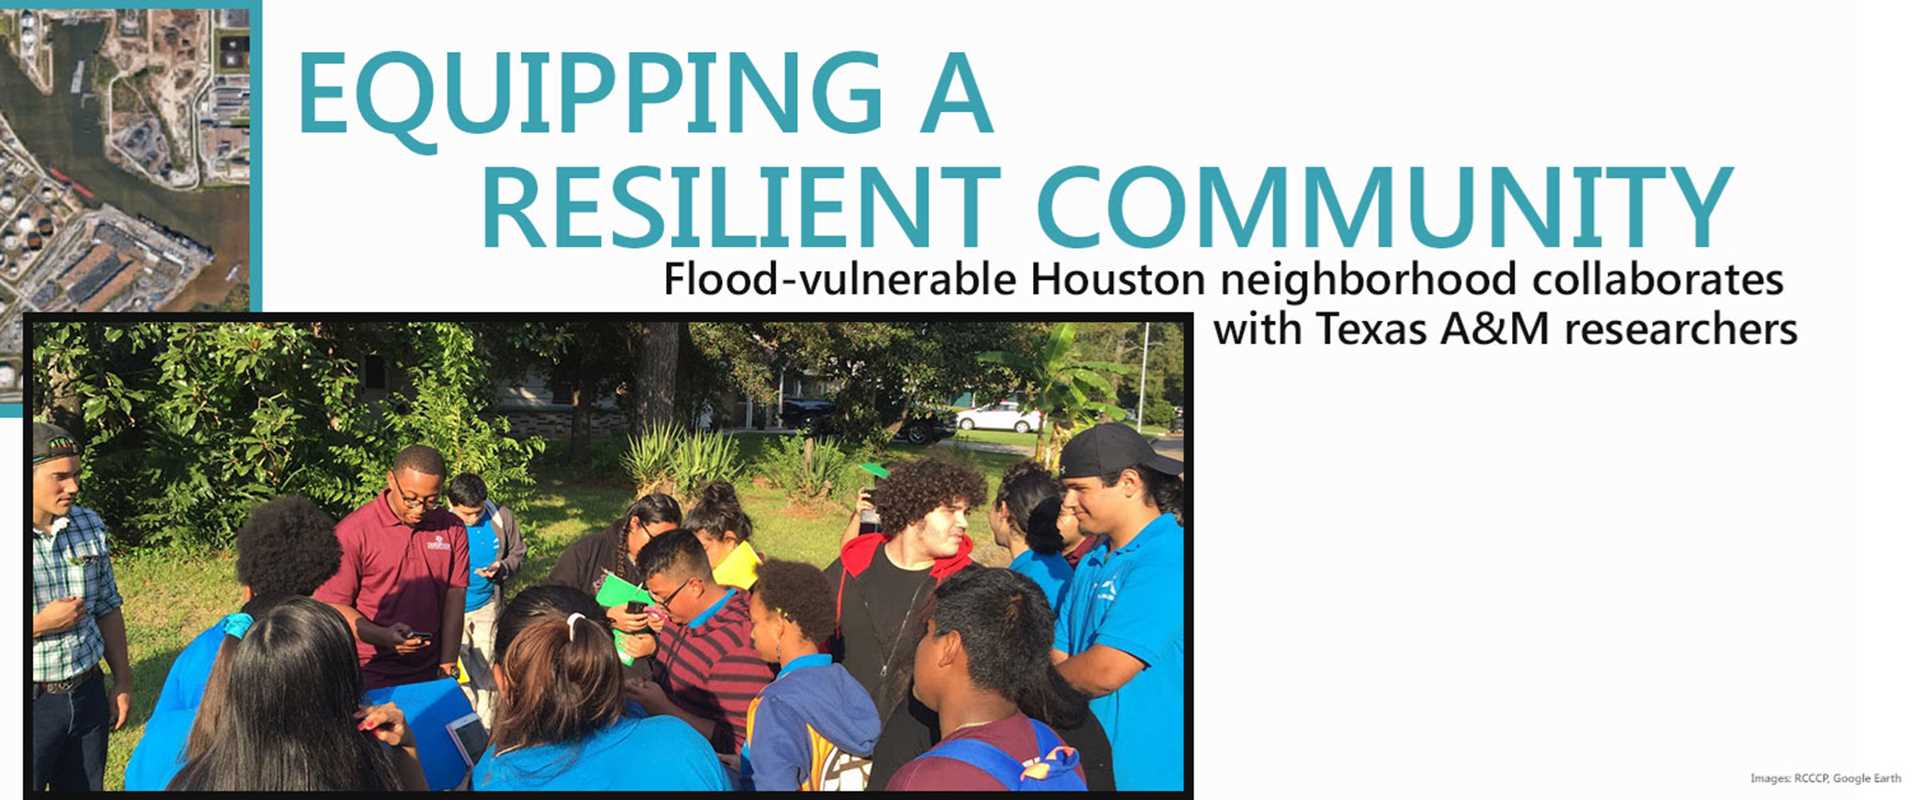 Equipping a resilient community